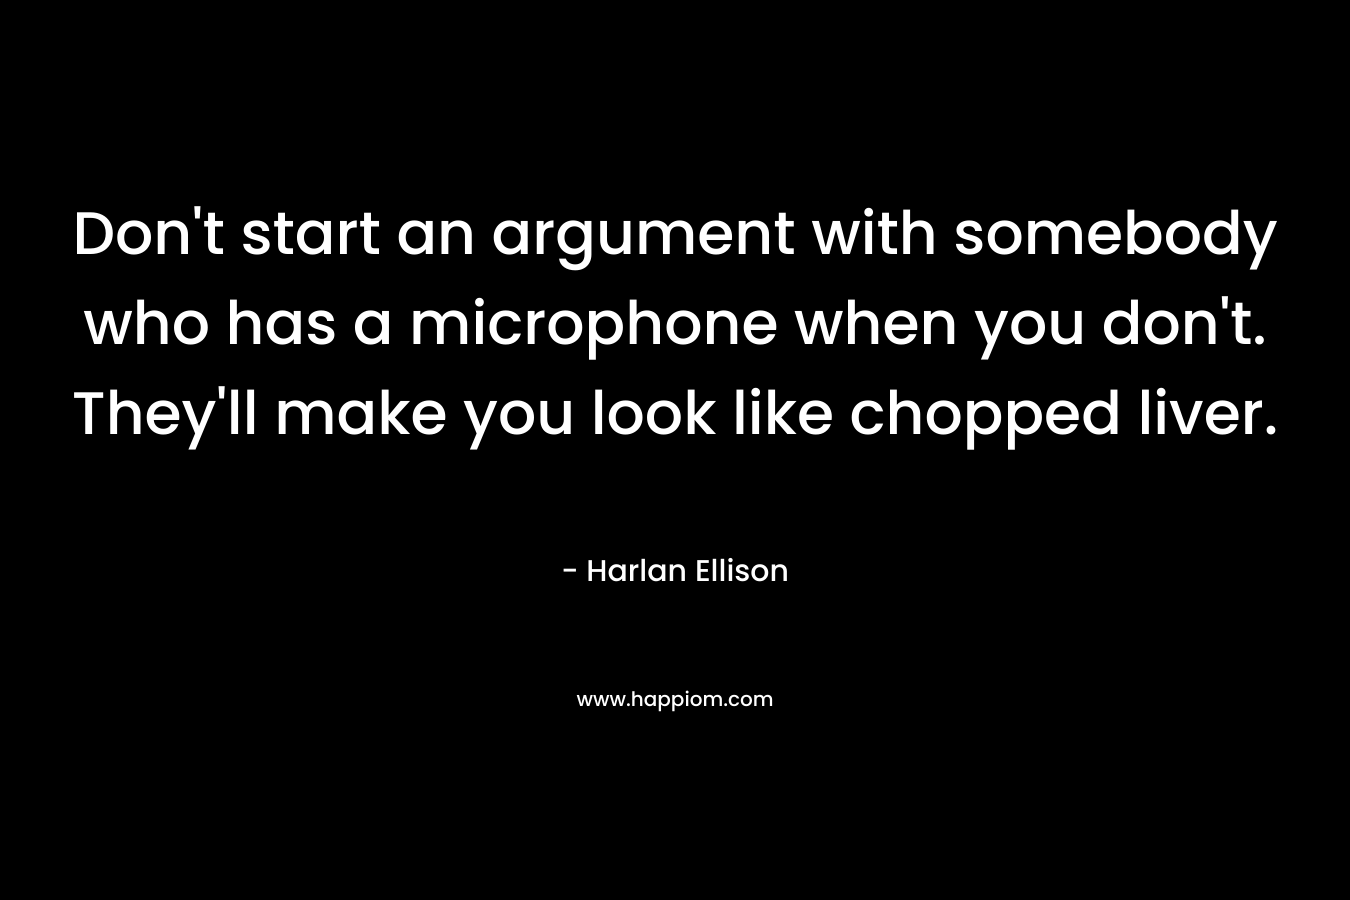 Don’t start an argument with somebody who has a microphone when you don’t. They’ll make you look like chopped liver. – Harlan Ellison